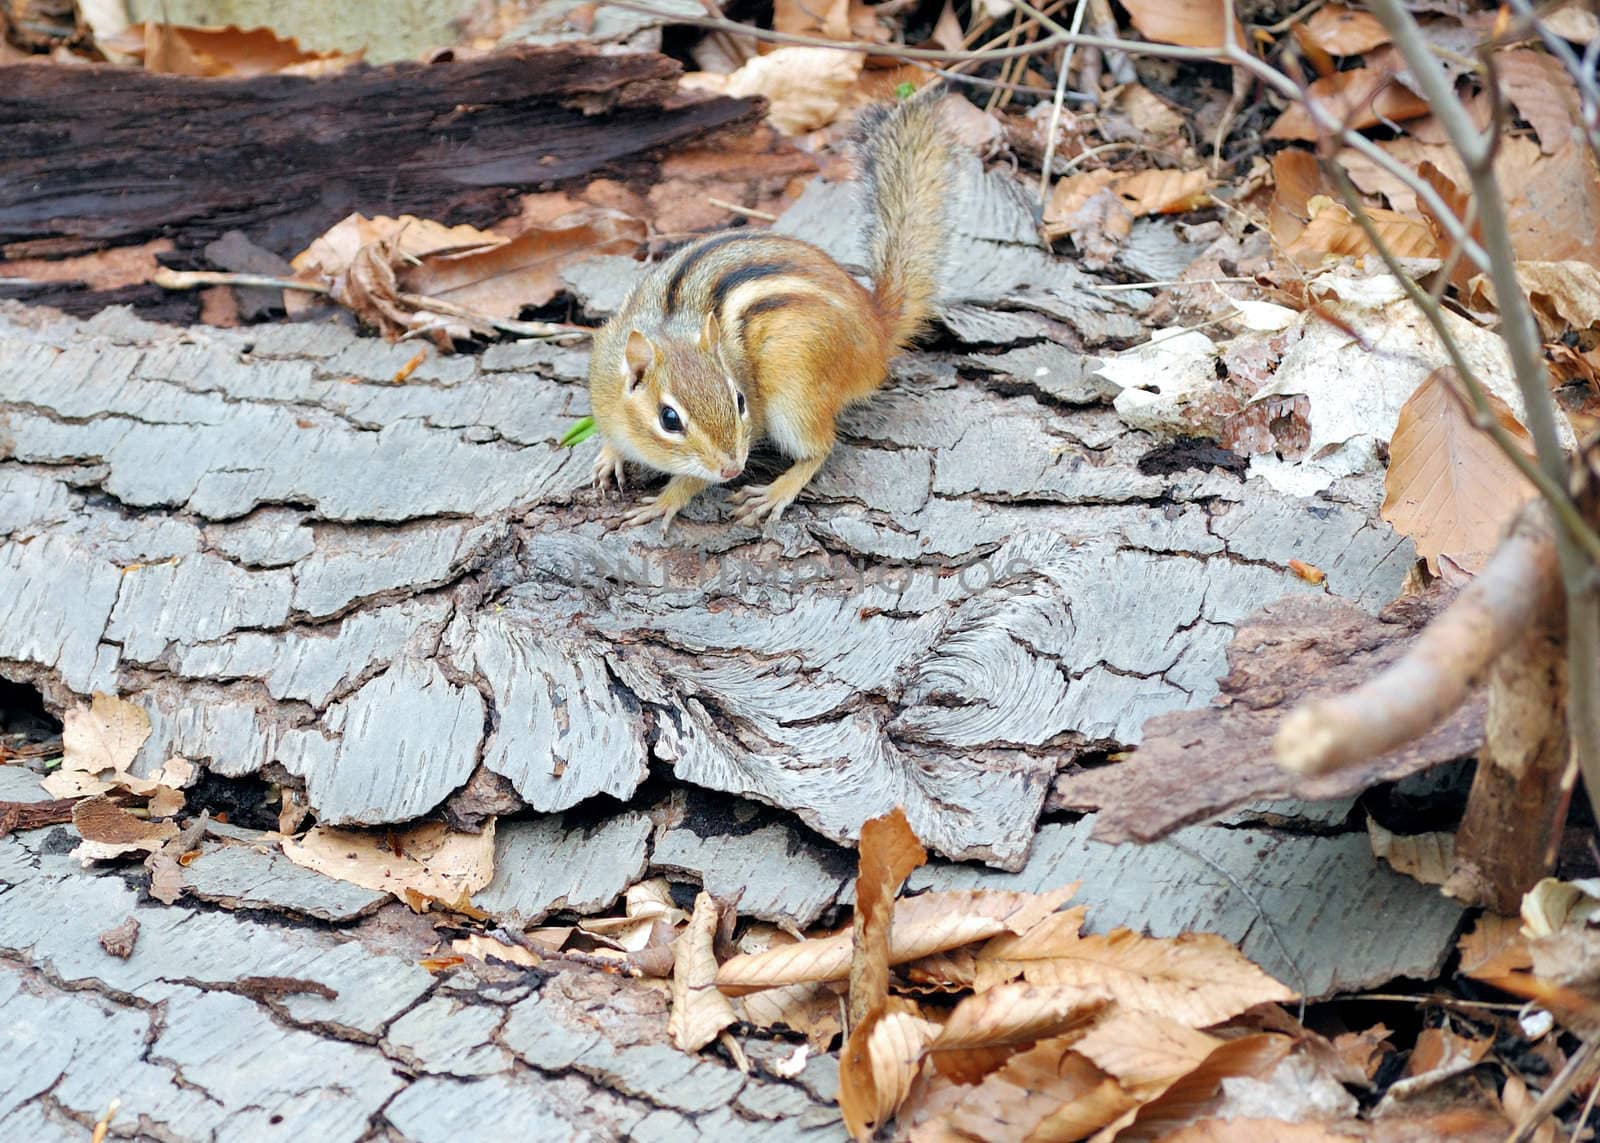 An eastern chipmunk perched on fallen bark in the woods.